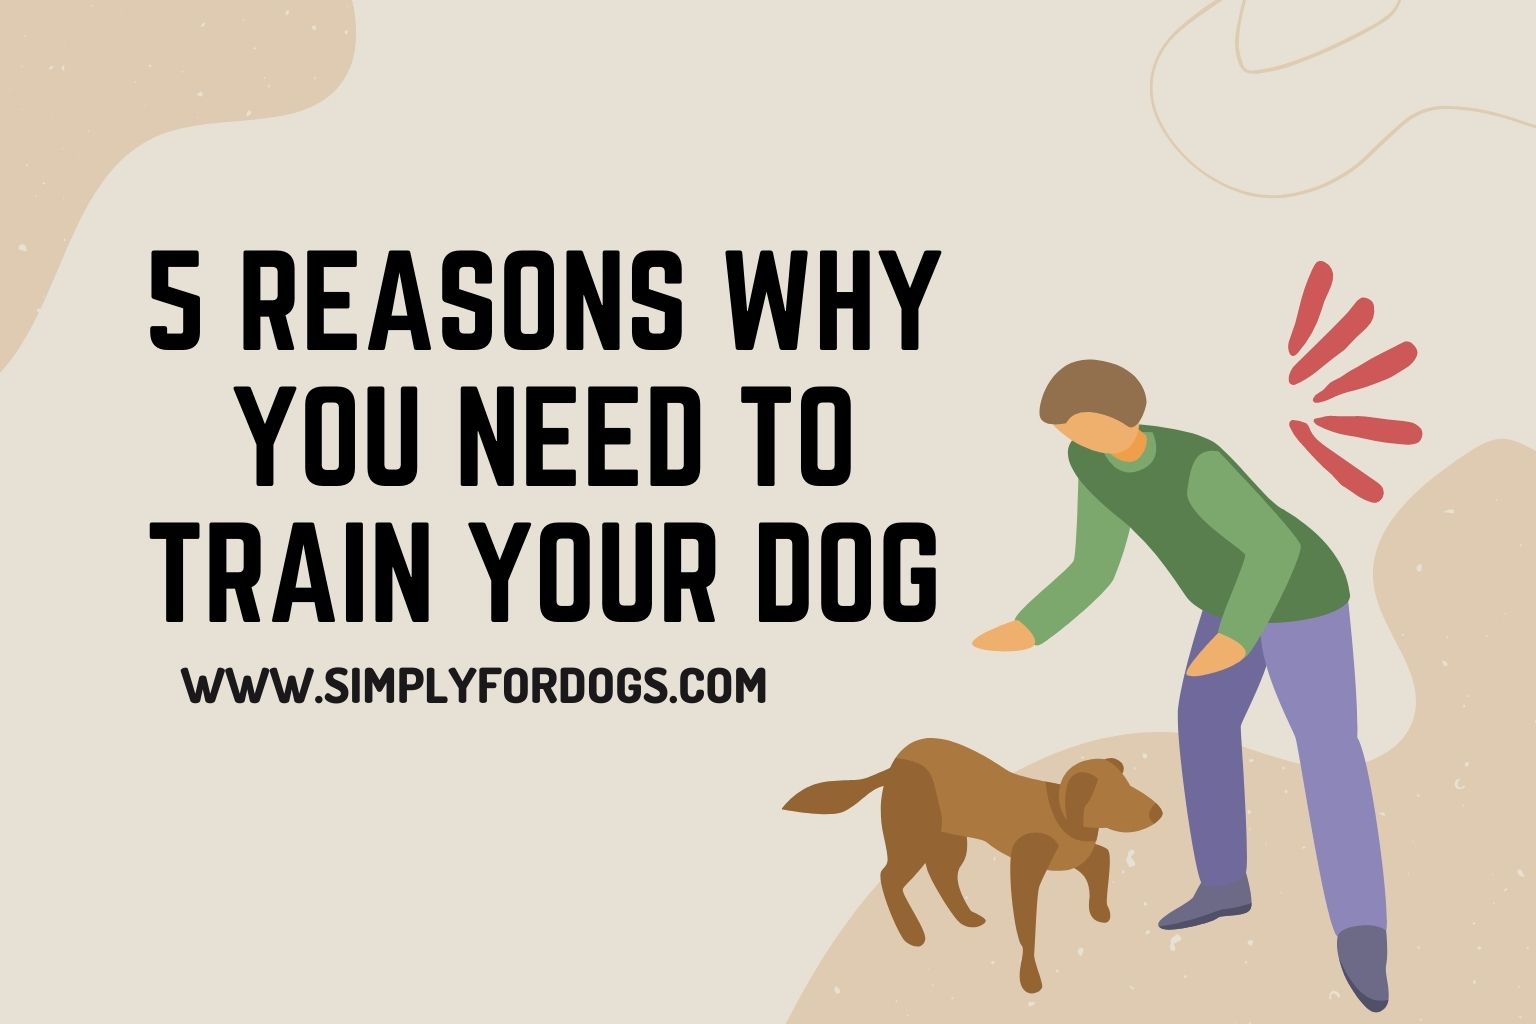 5 Reasons Why You Need to Train Your Dog